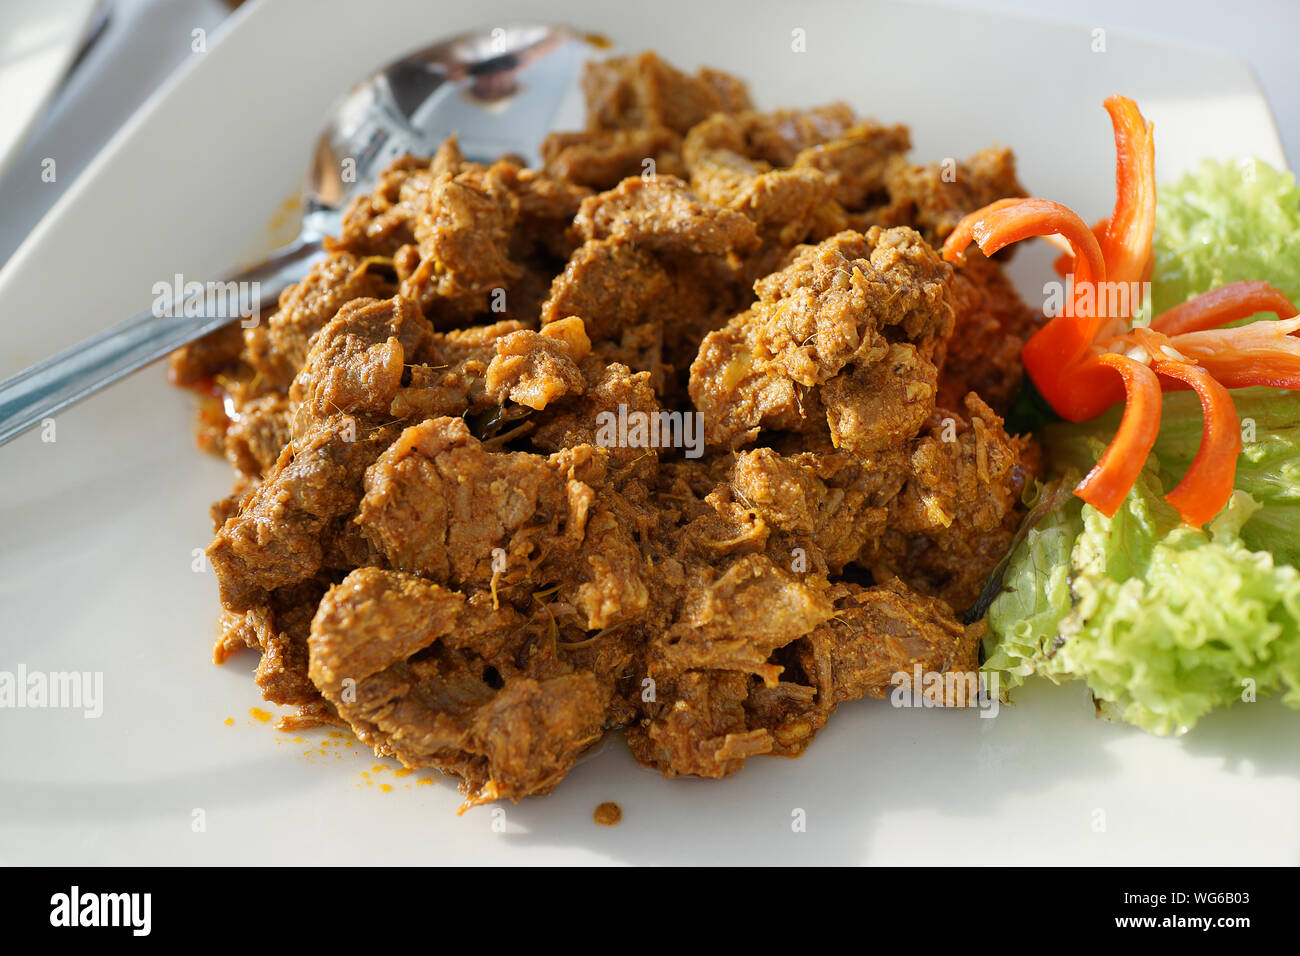 High Angle Close-up Of Beef Rendang Served In Plate Stock Photo